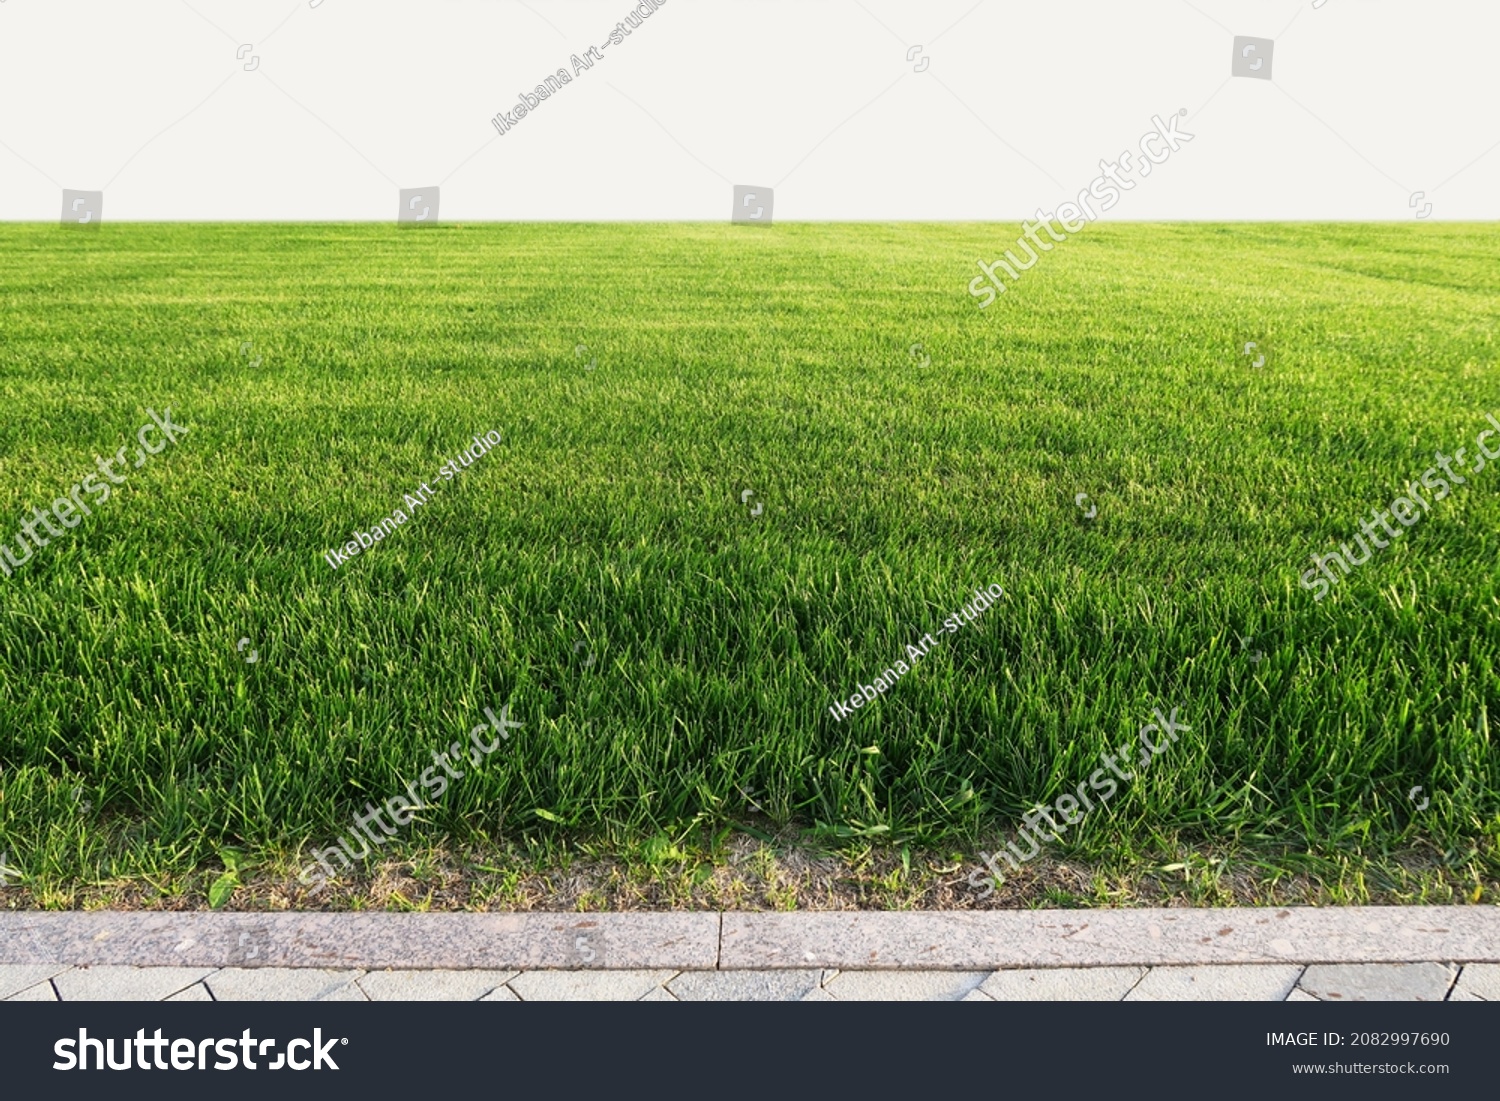 Smooth green grass, lawn against the background of a large blue sky on a sunny day. Wide view of the manicured lawn. The natural background of yellow-green grass in the rays of the setting sun.        #2082997690